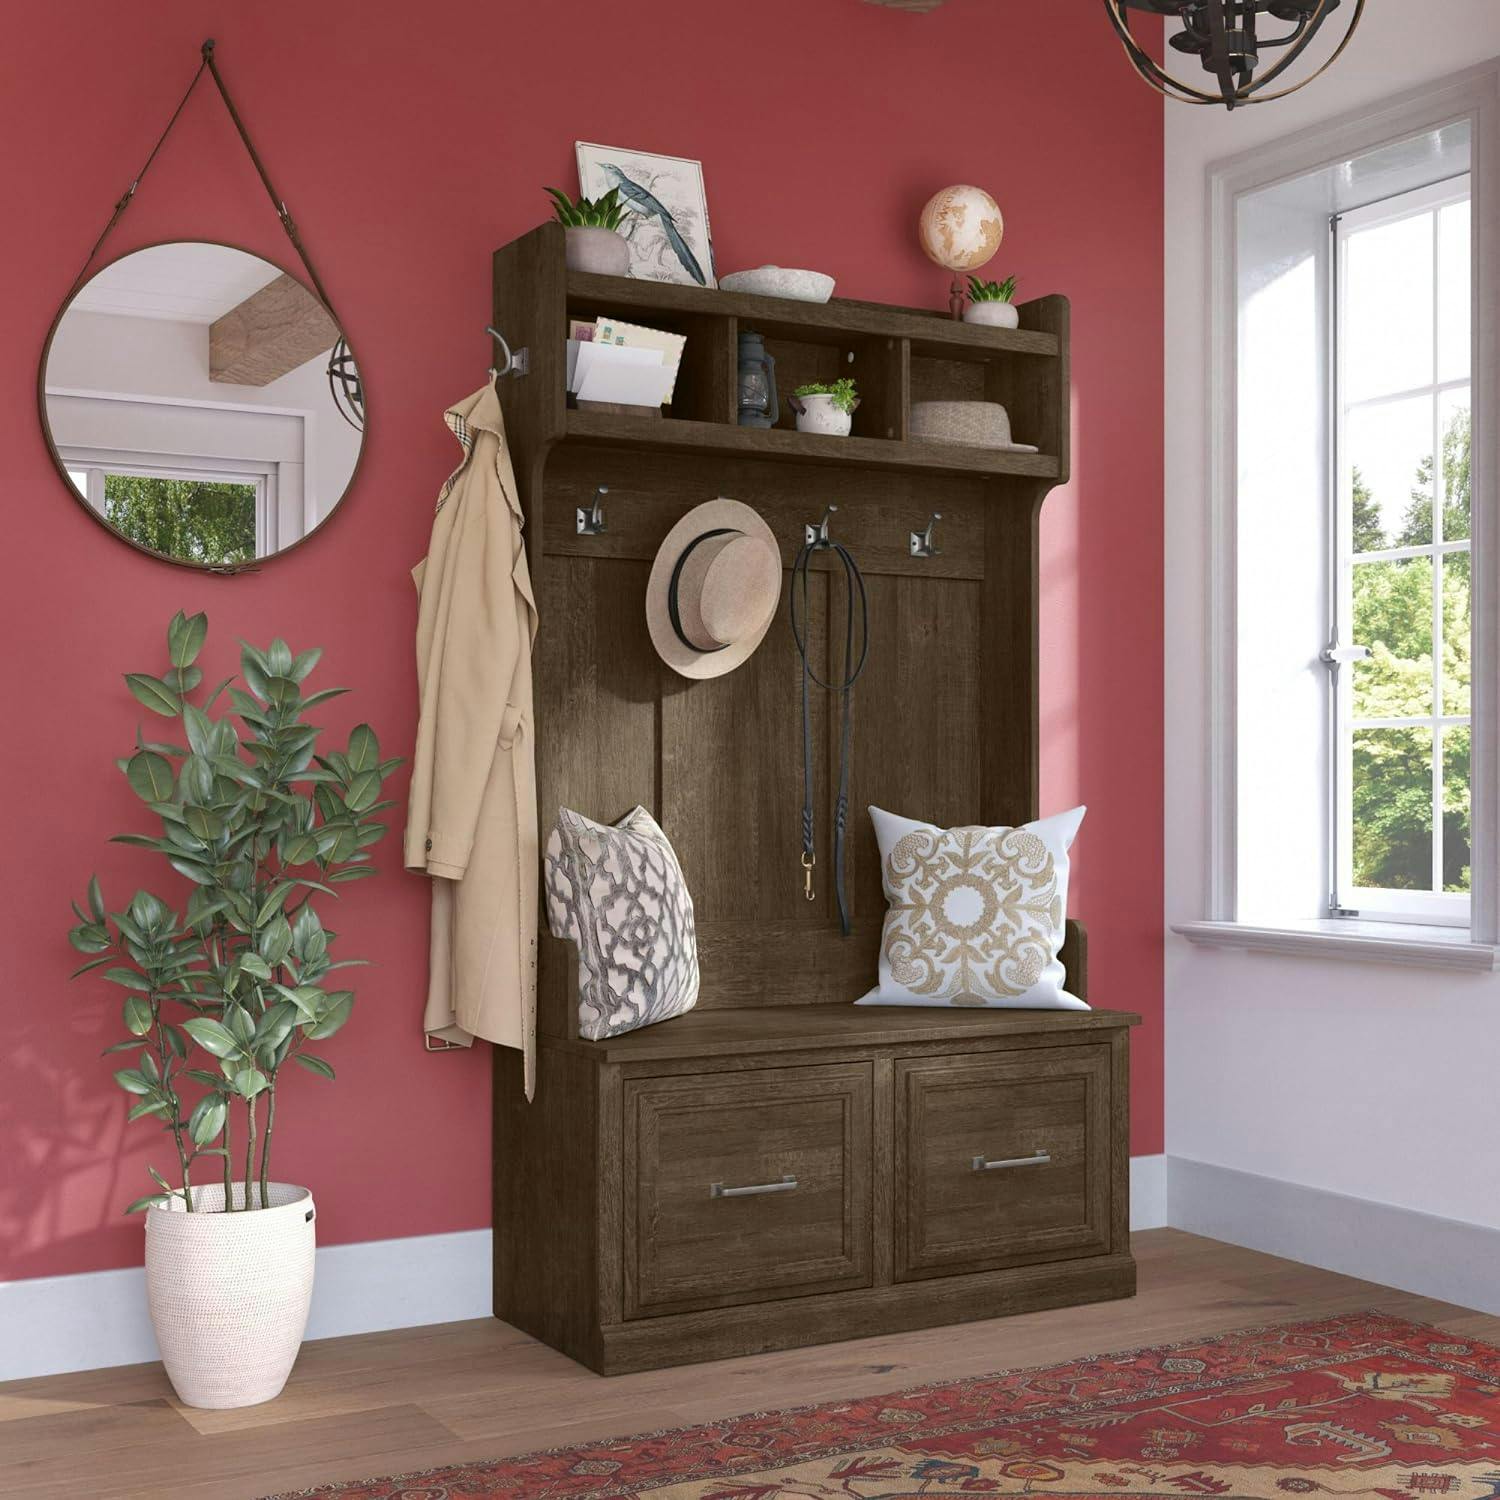 Transitional Ash Brown Hall Tree with Shoe Storage and Euro Hinges